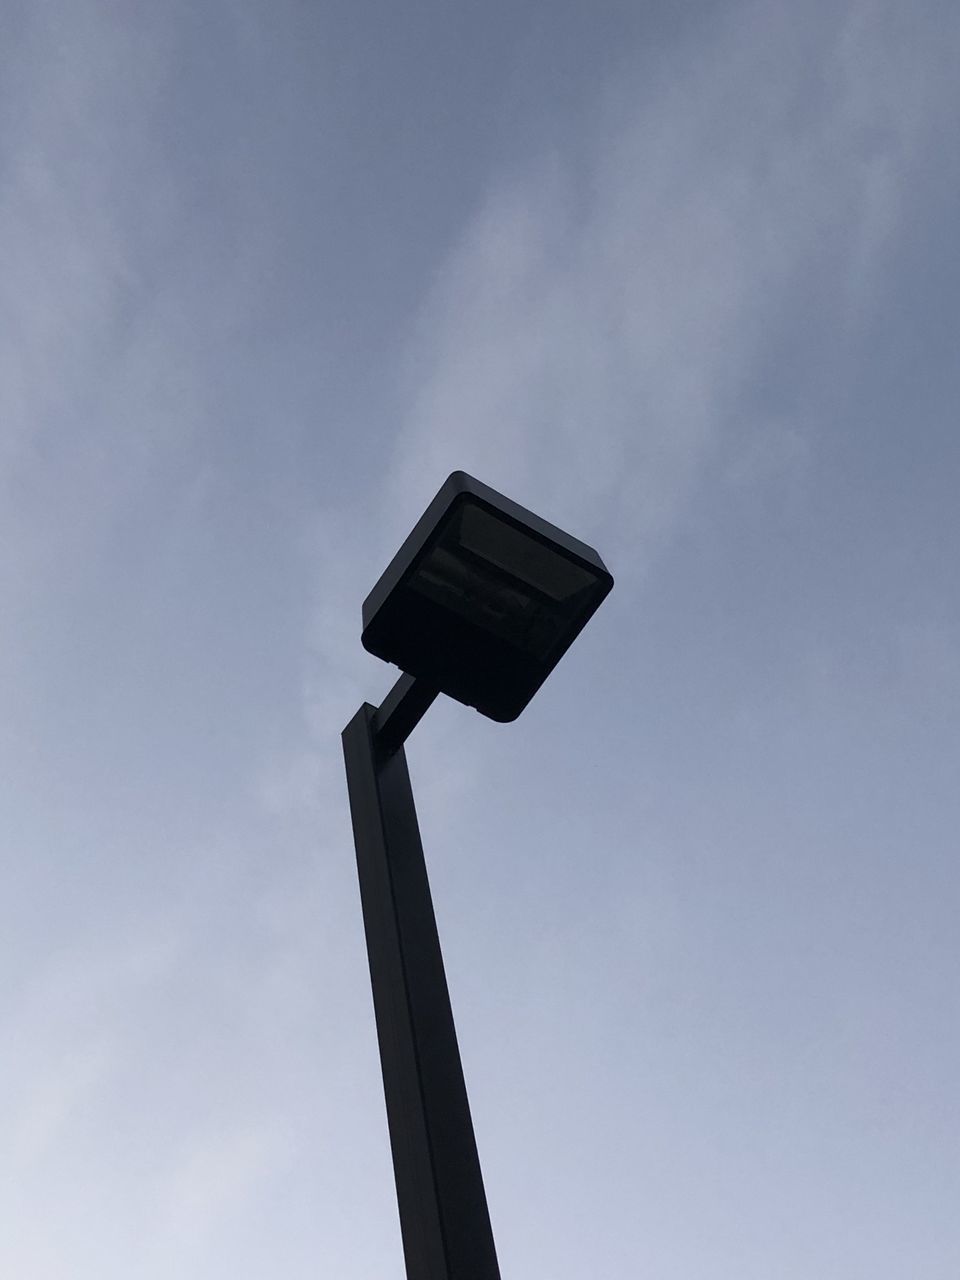 LOW ANGLE VIEW OF LAMP AGAINST SKY